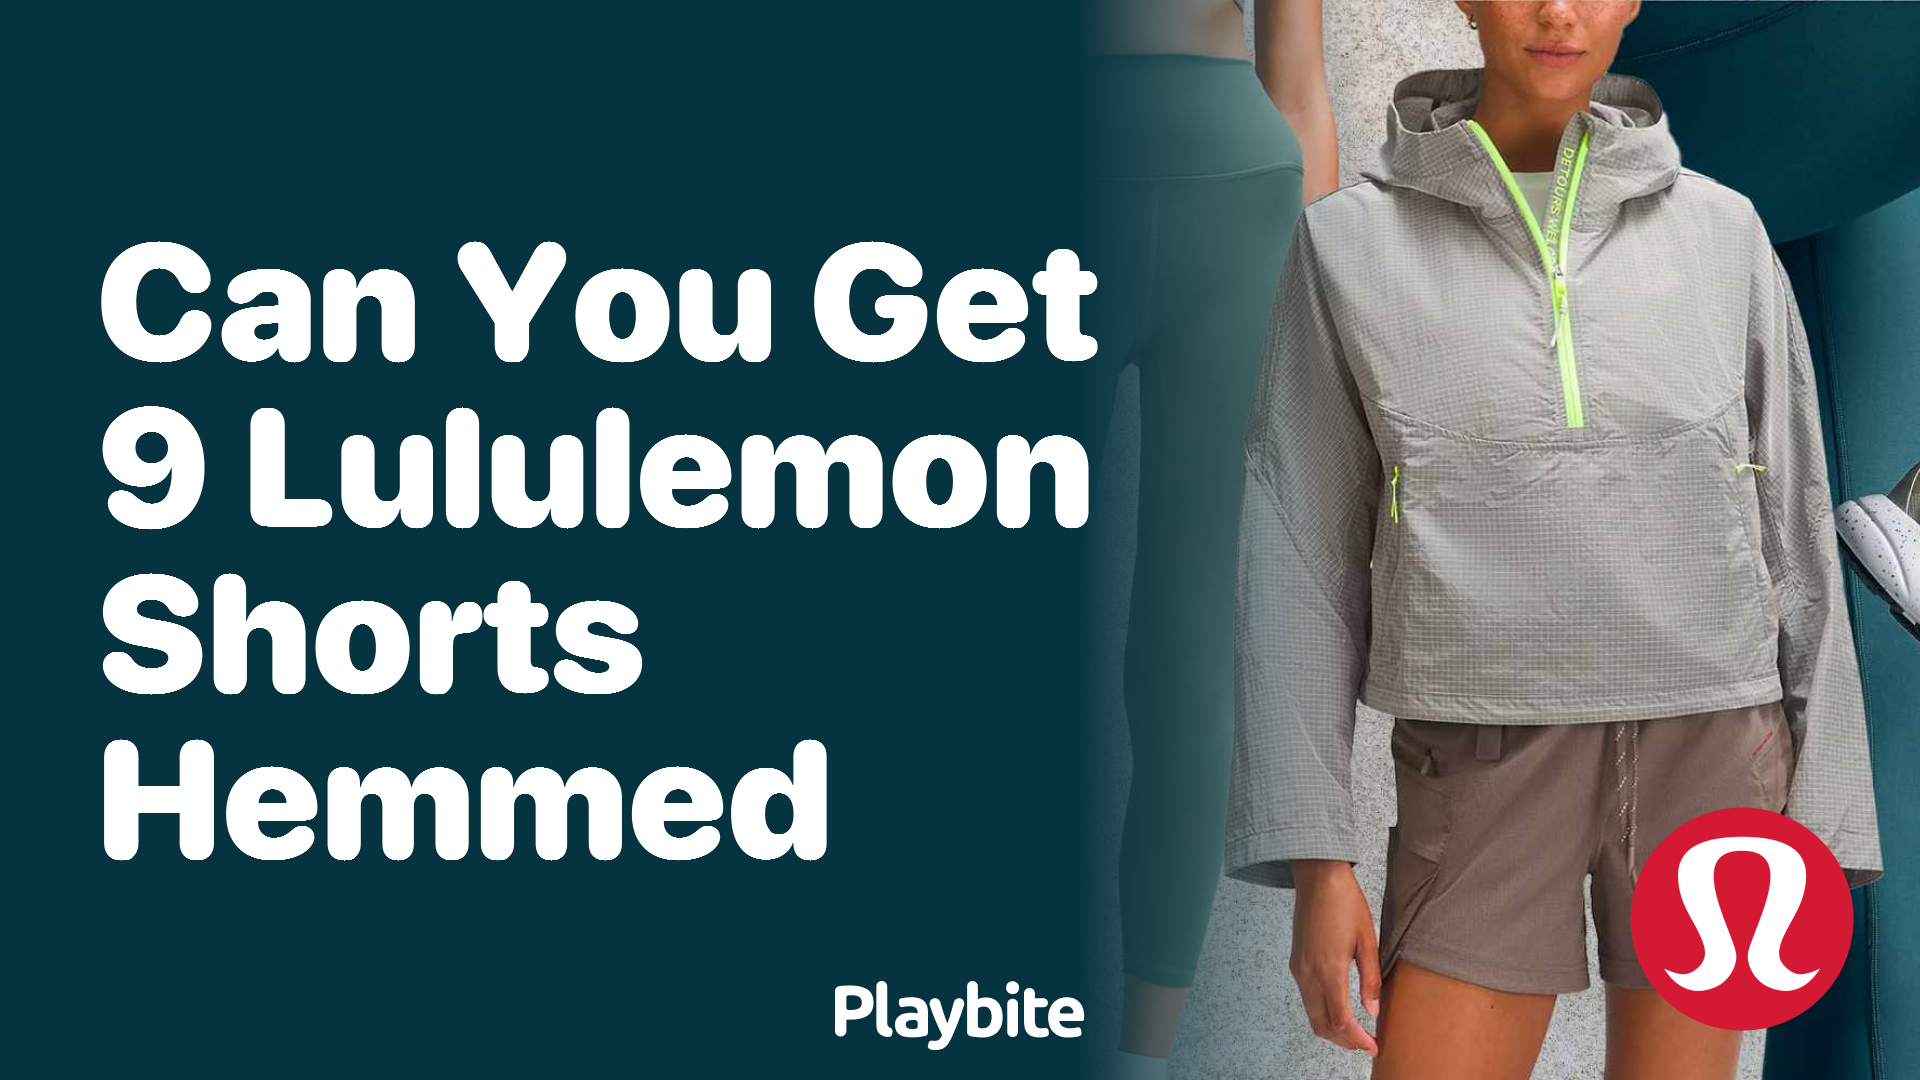 Hack To Get Lululemon For Cheaper And Better - Christinabtv